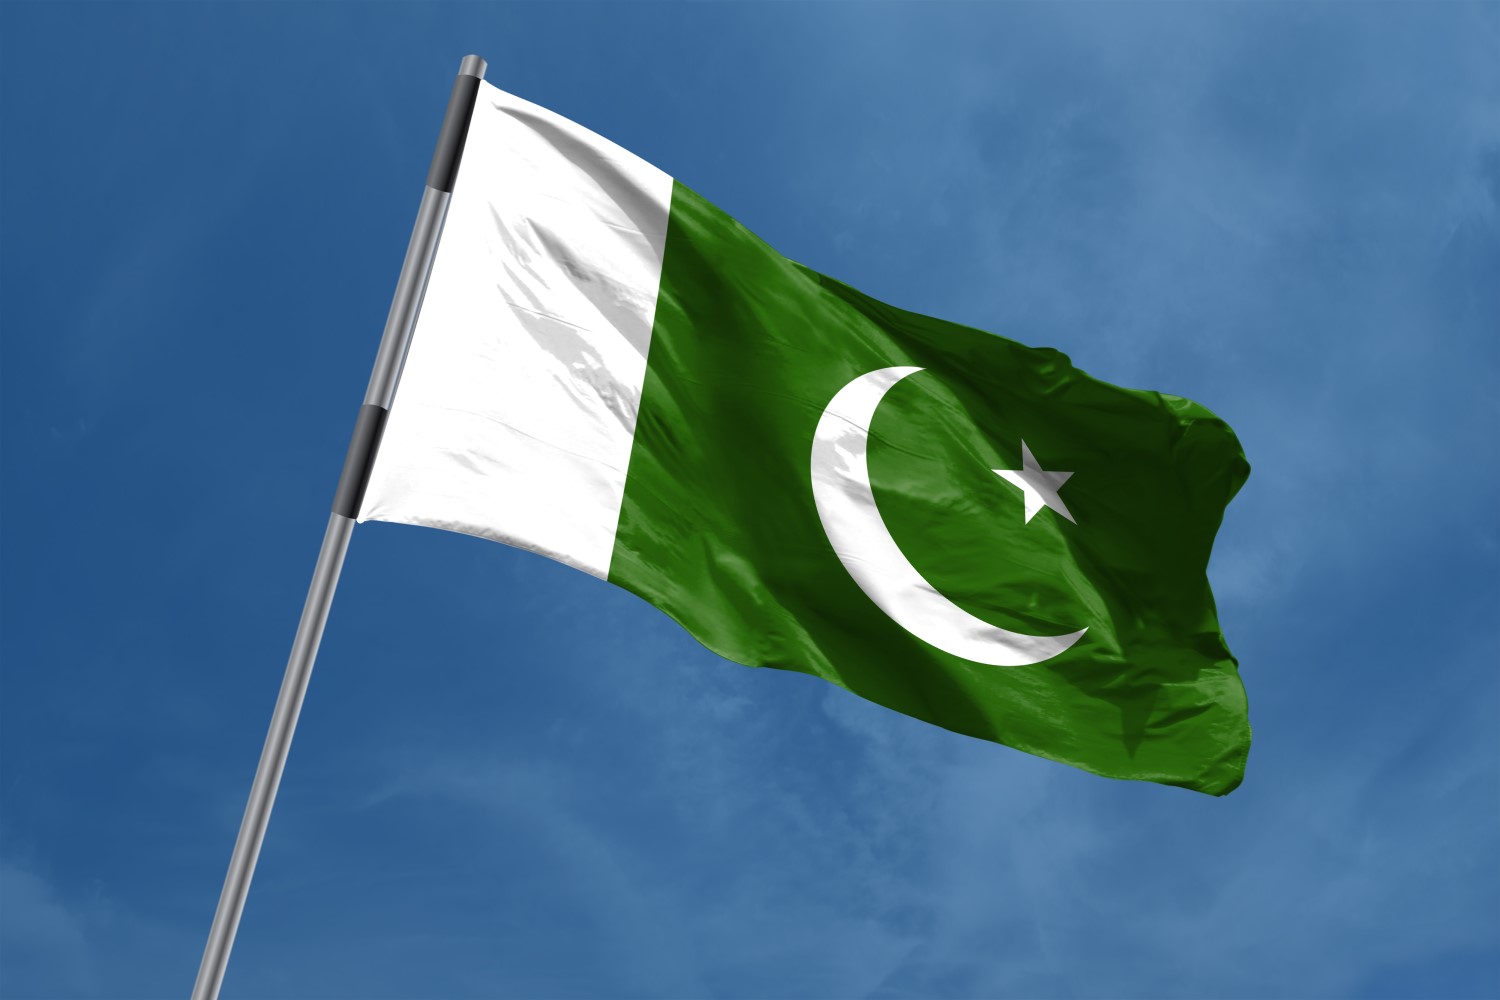 Pakistan Introducing Regulations, Licensing Scheme For Crypto Firms